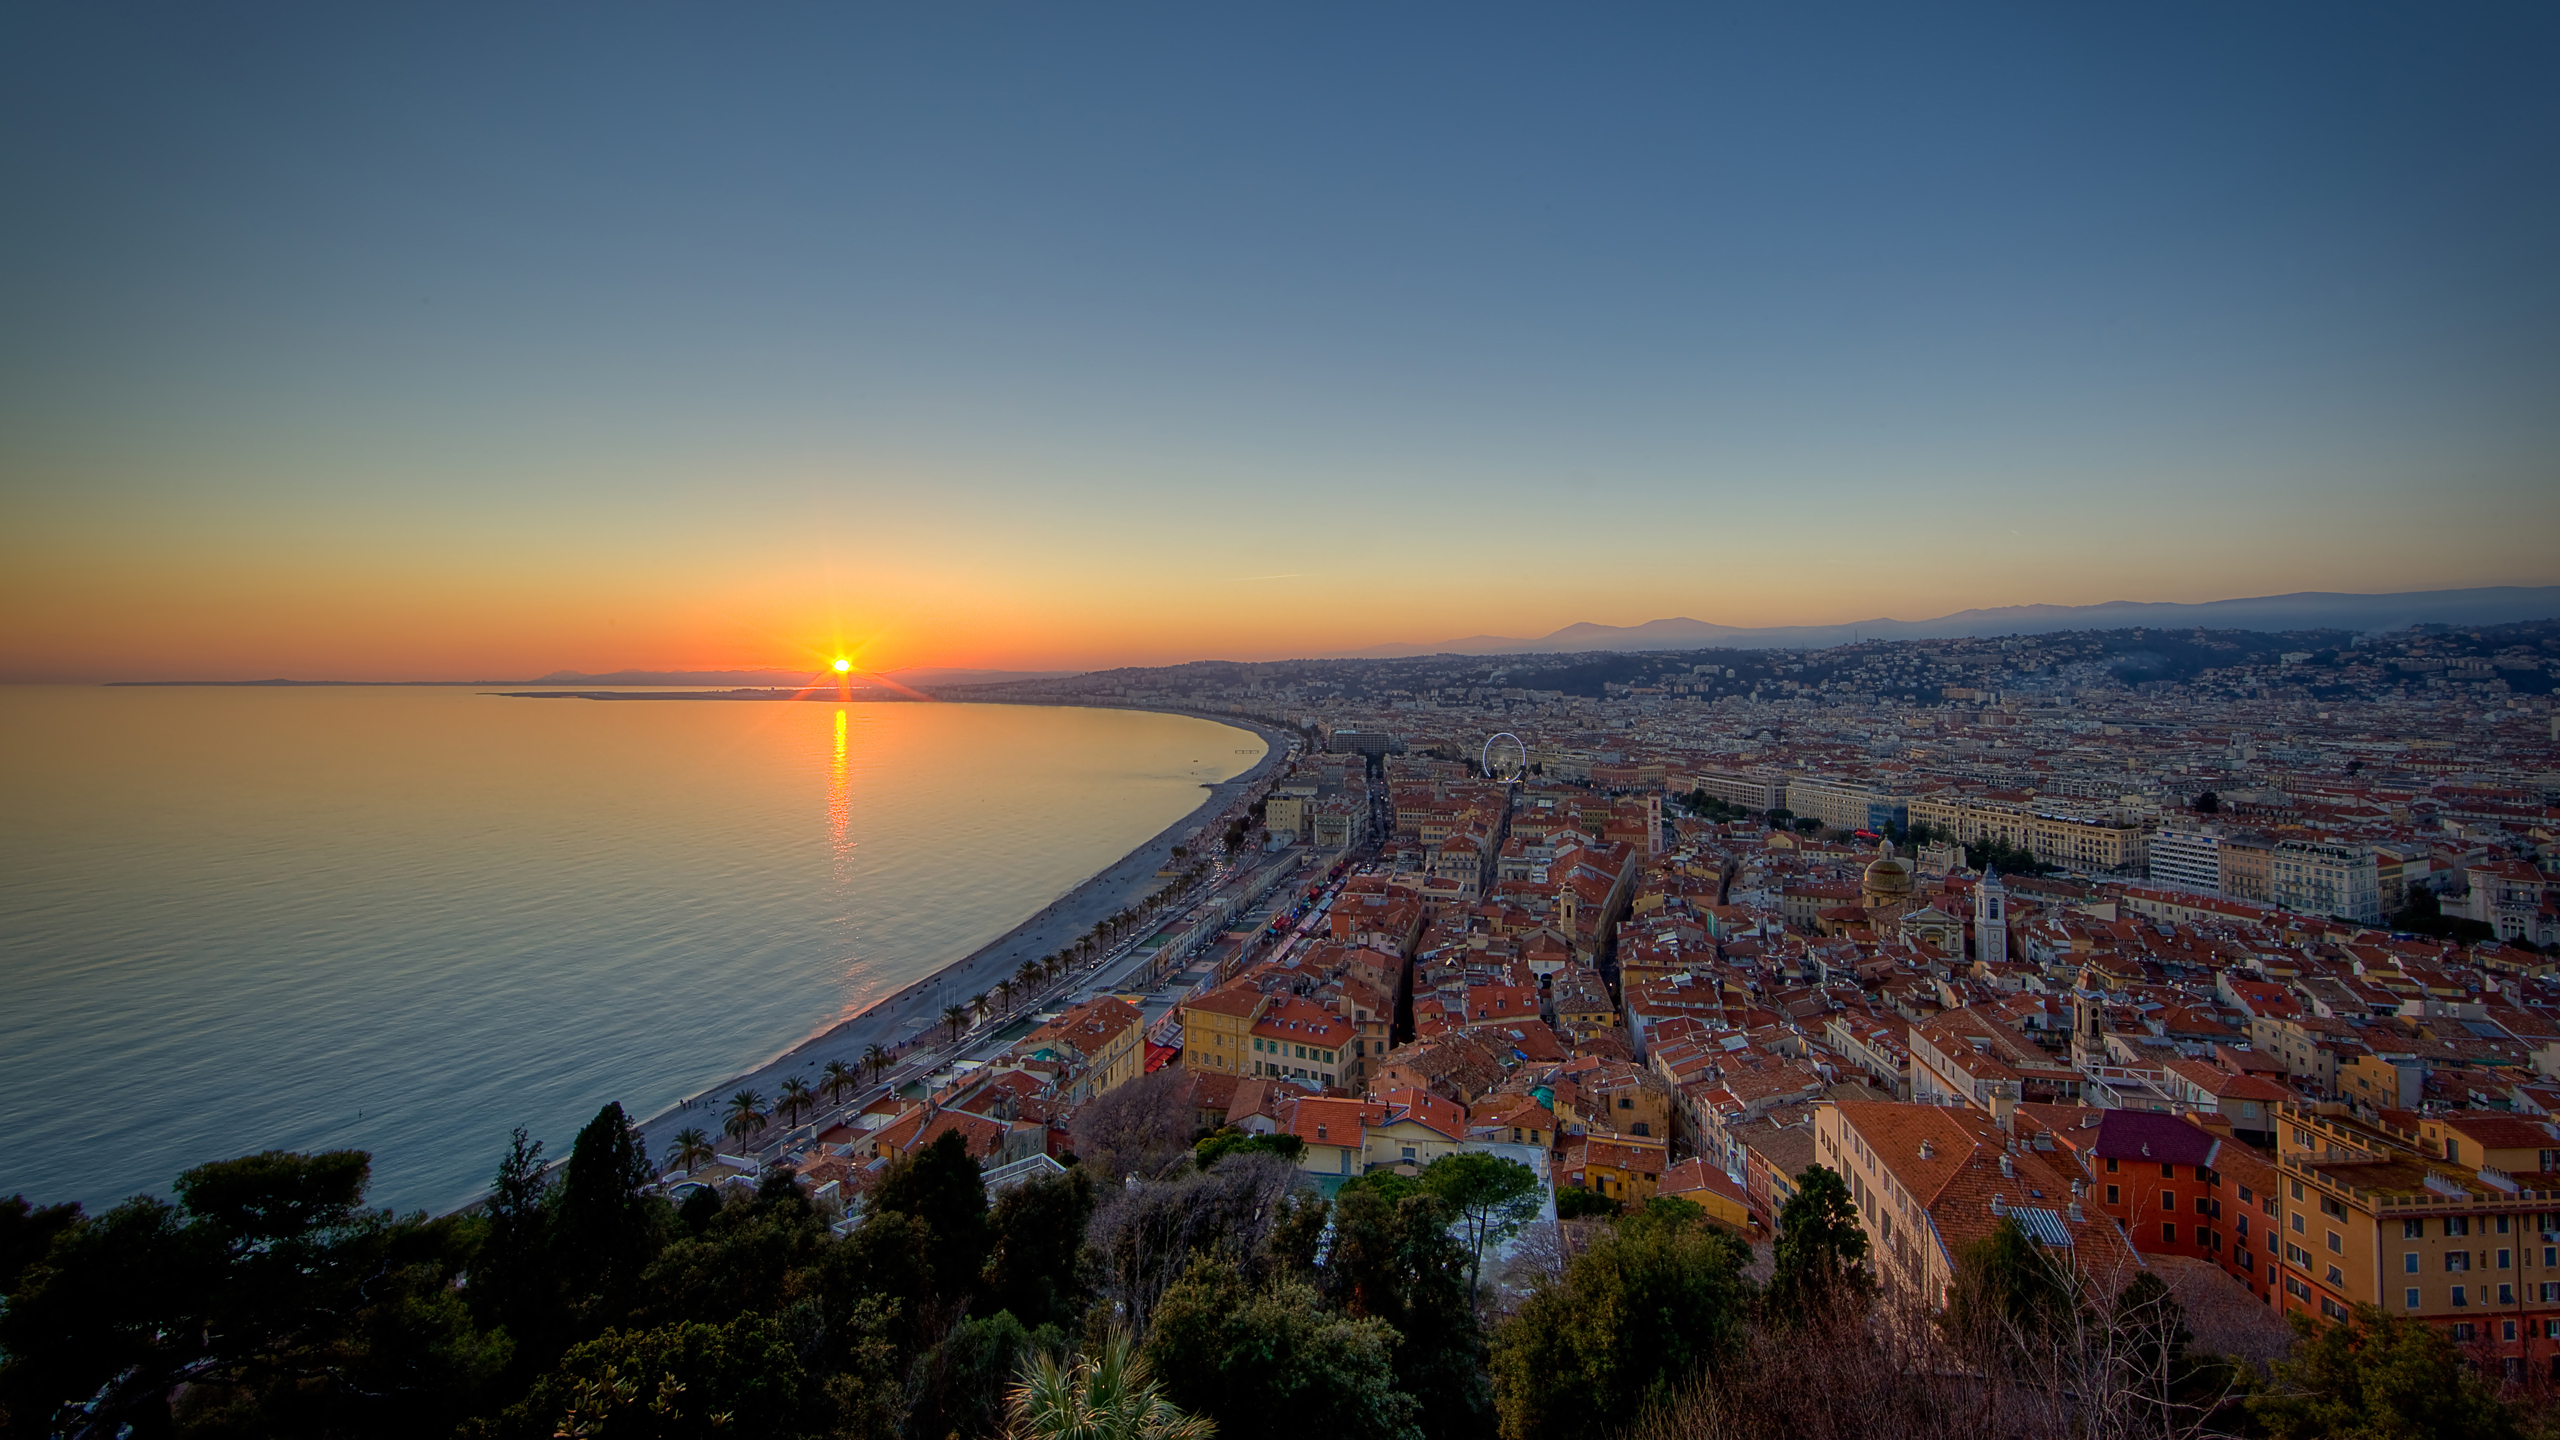 Sunset over the French Riviera (Cote d'Azur) - a stunning scenic view.